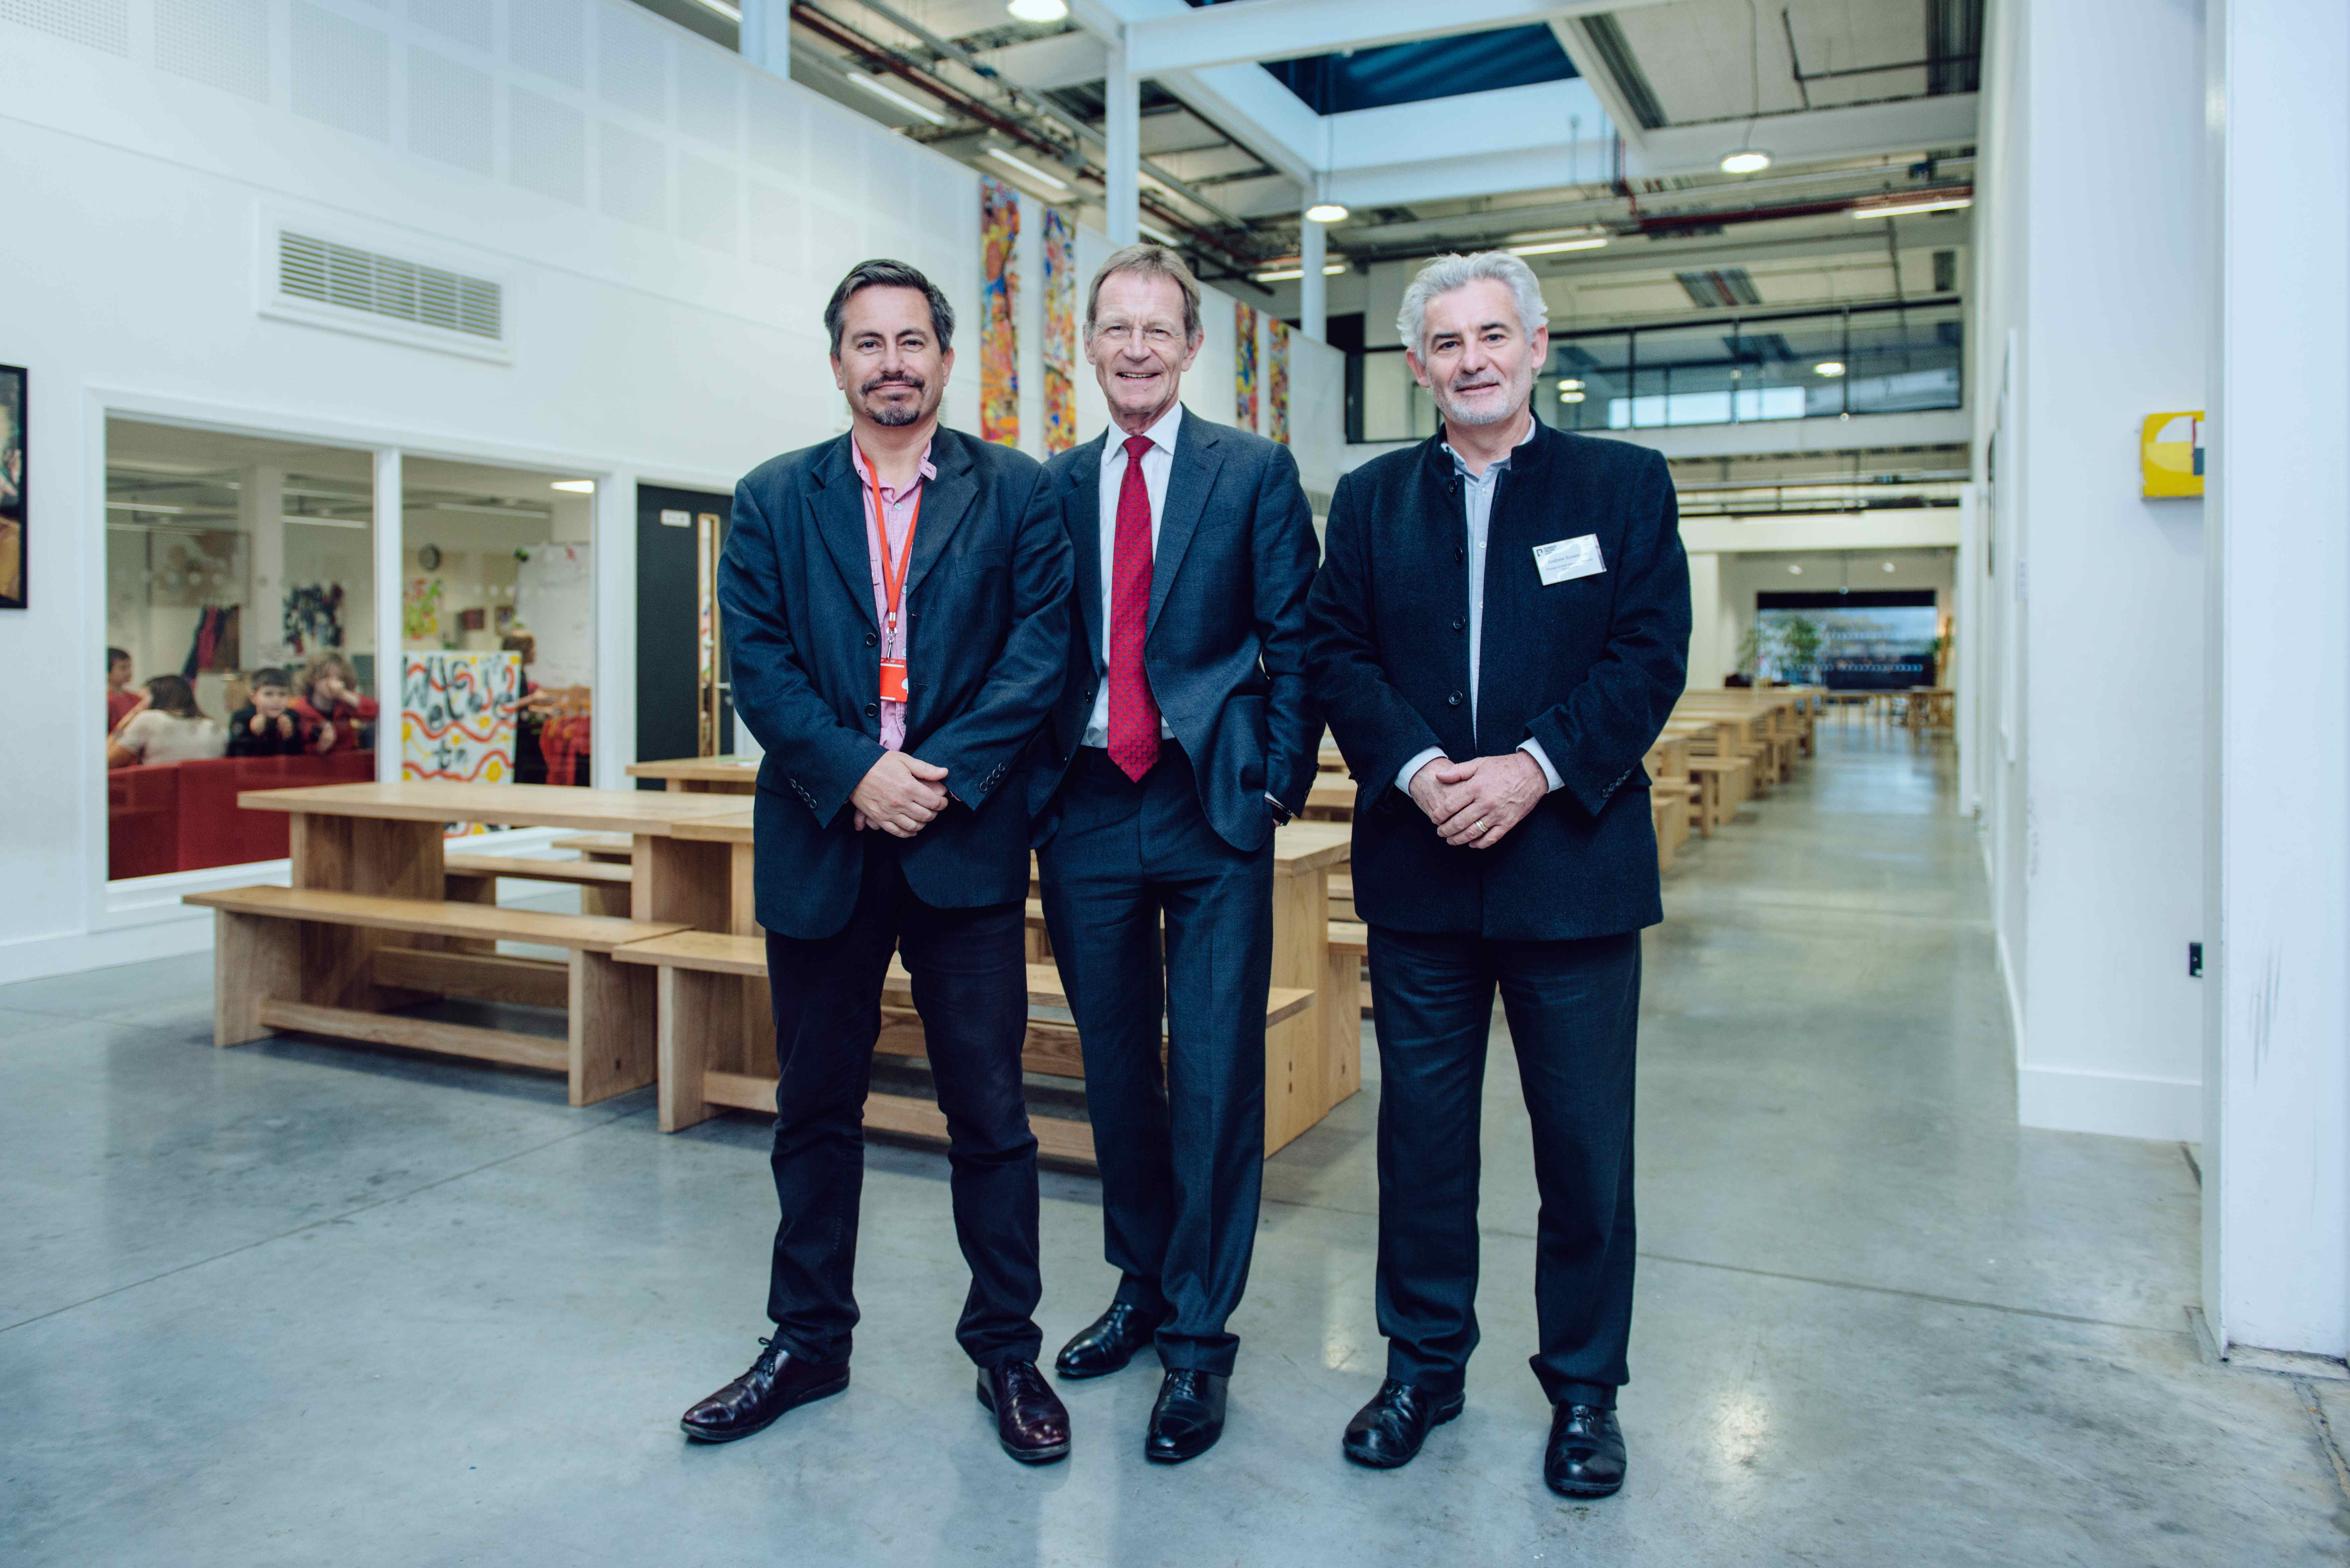 Dave Strudwick, Headmaster of PSCA, Sir Nicholas Serota, Director of Tate, and Prof Andrew Brewerton, Principal of Plymouth College of Art - Photo by Dom Moore